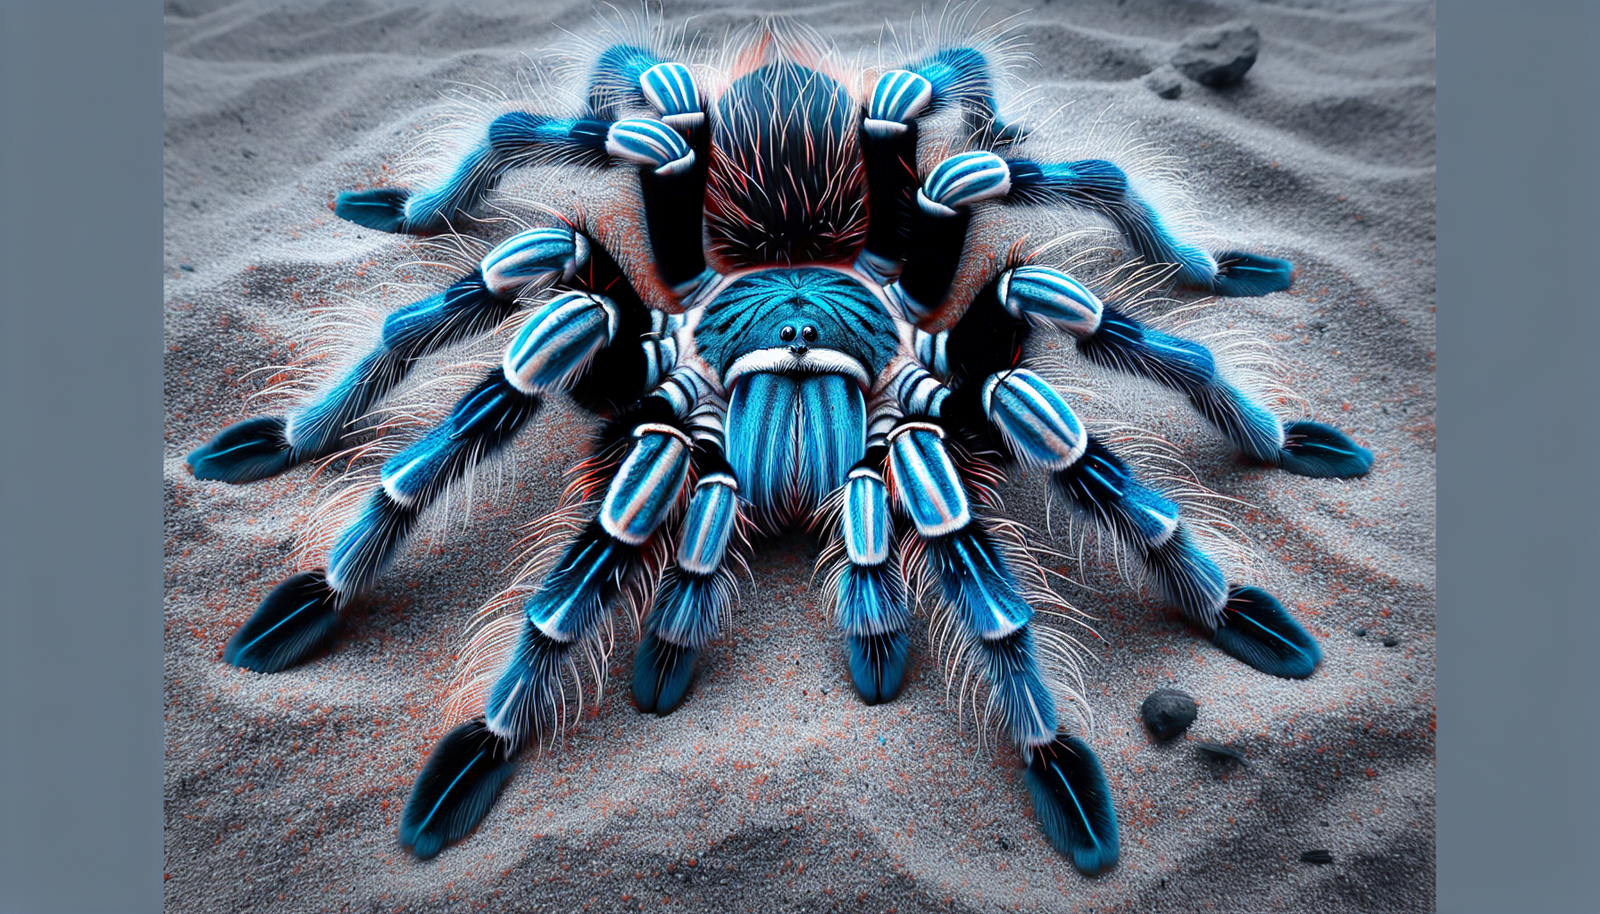 What Is The Temperament Of The Rare And Sought-after Socotra Island Blue Baboon Tarantula?